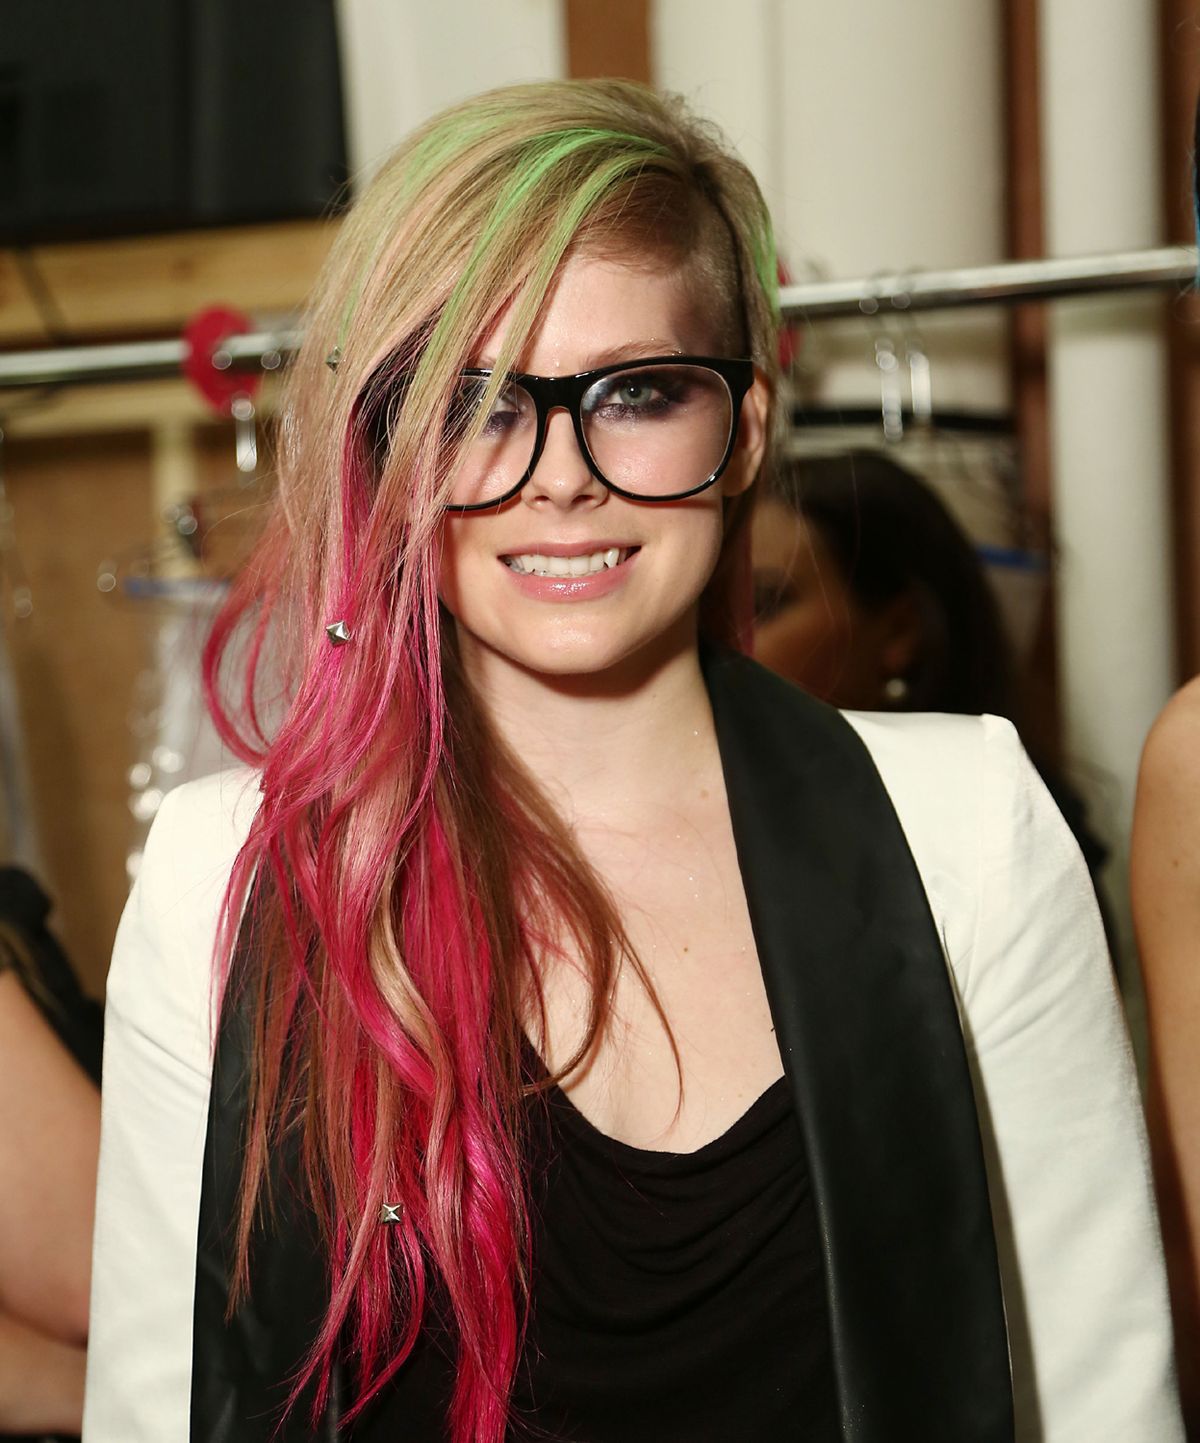 Proof That The Avril Lavigne Conspiracy Theory Is Just Not True